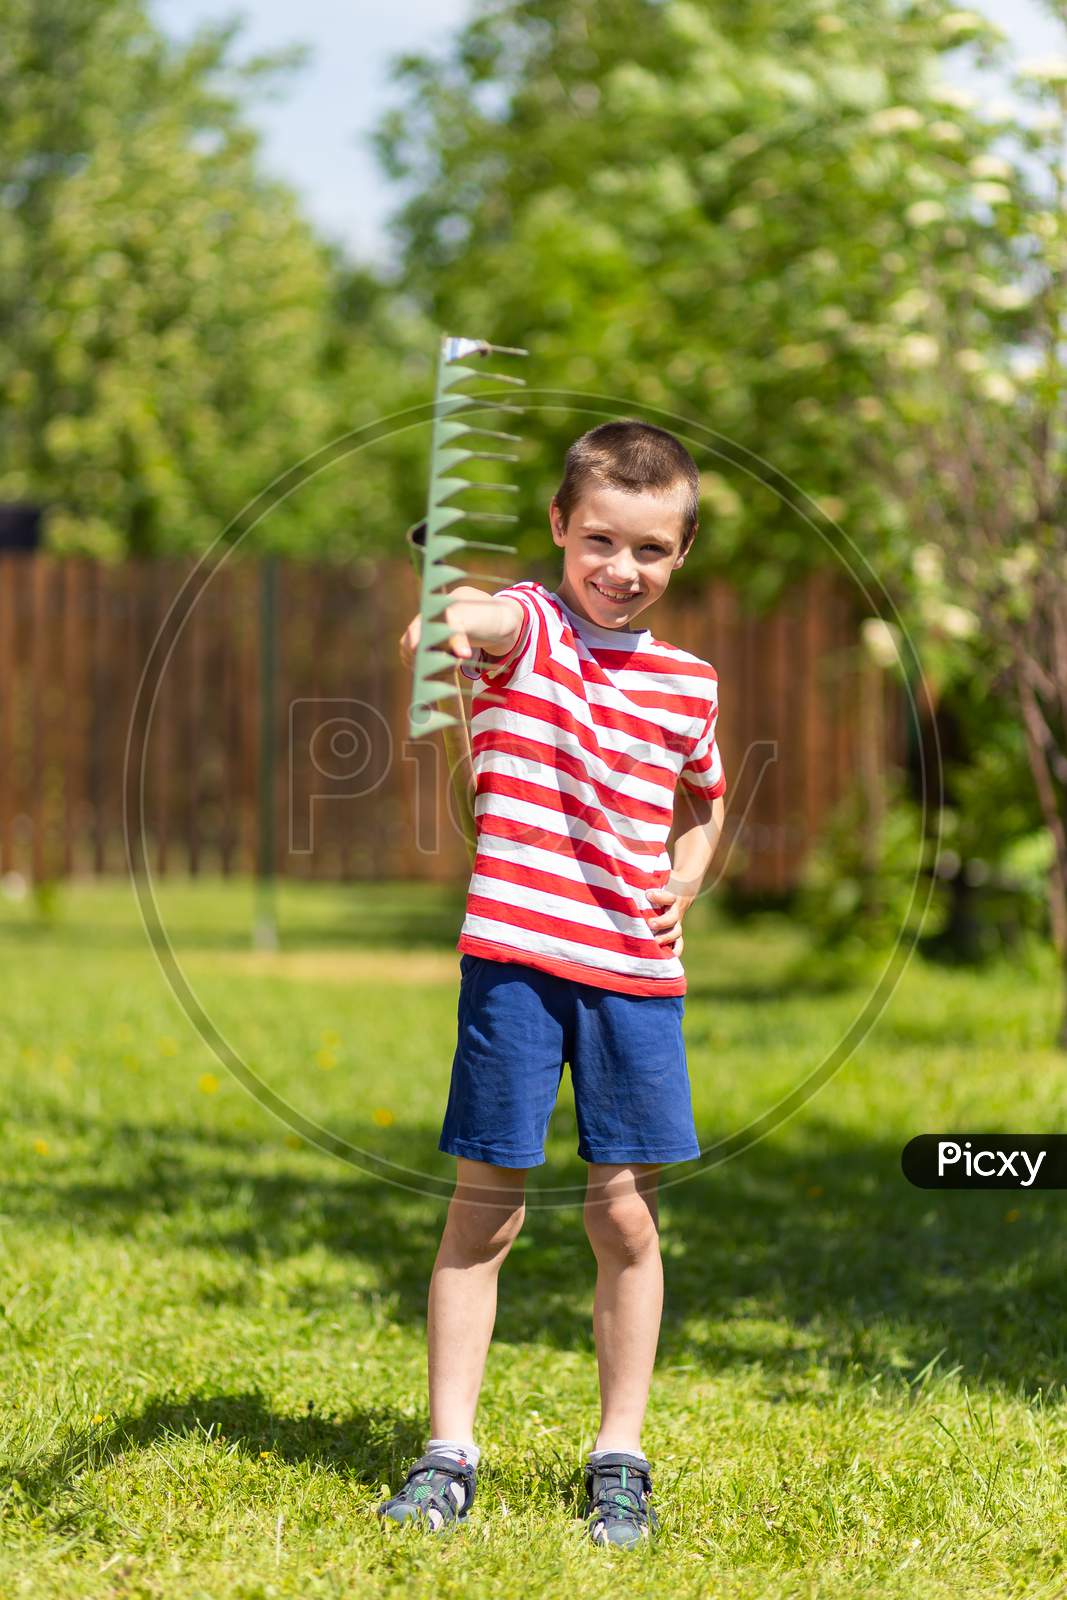 A Little Cheerful Boy Stands And Holds A Rake In His Hand, Ready To Work In The Garden Of A Country House.